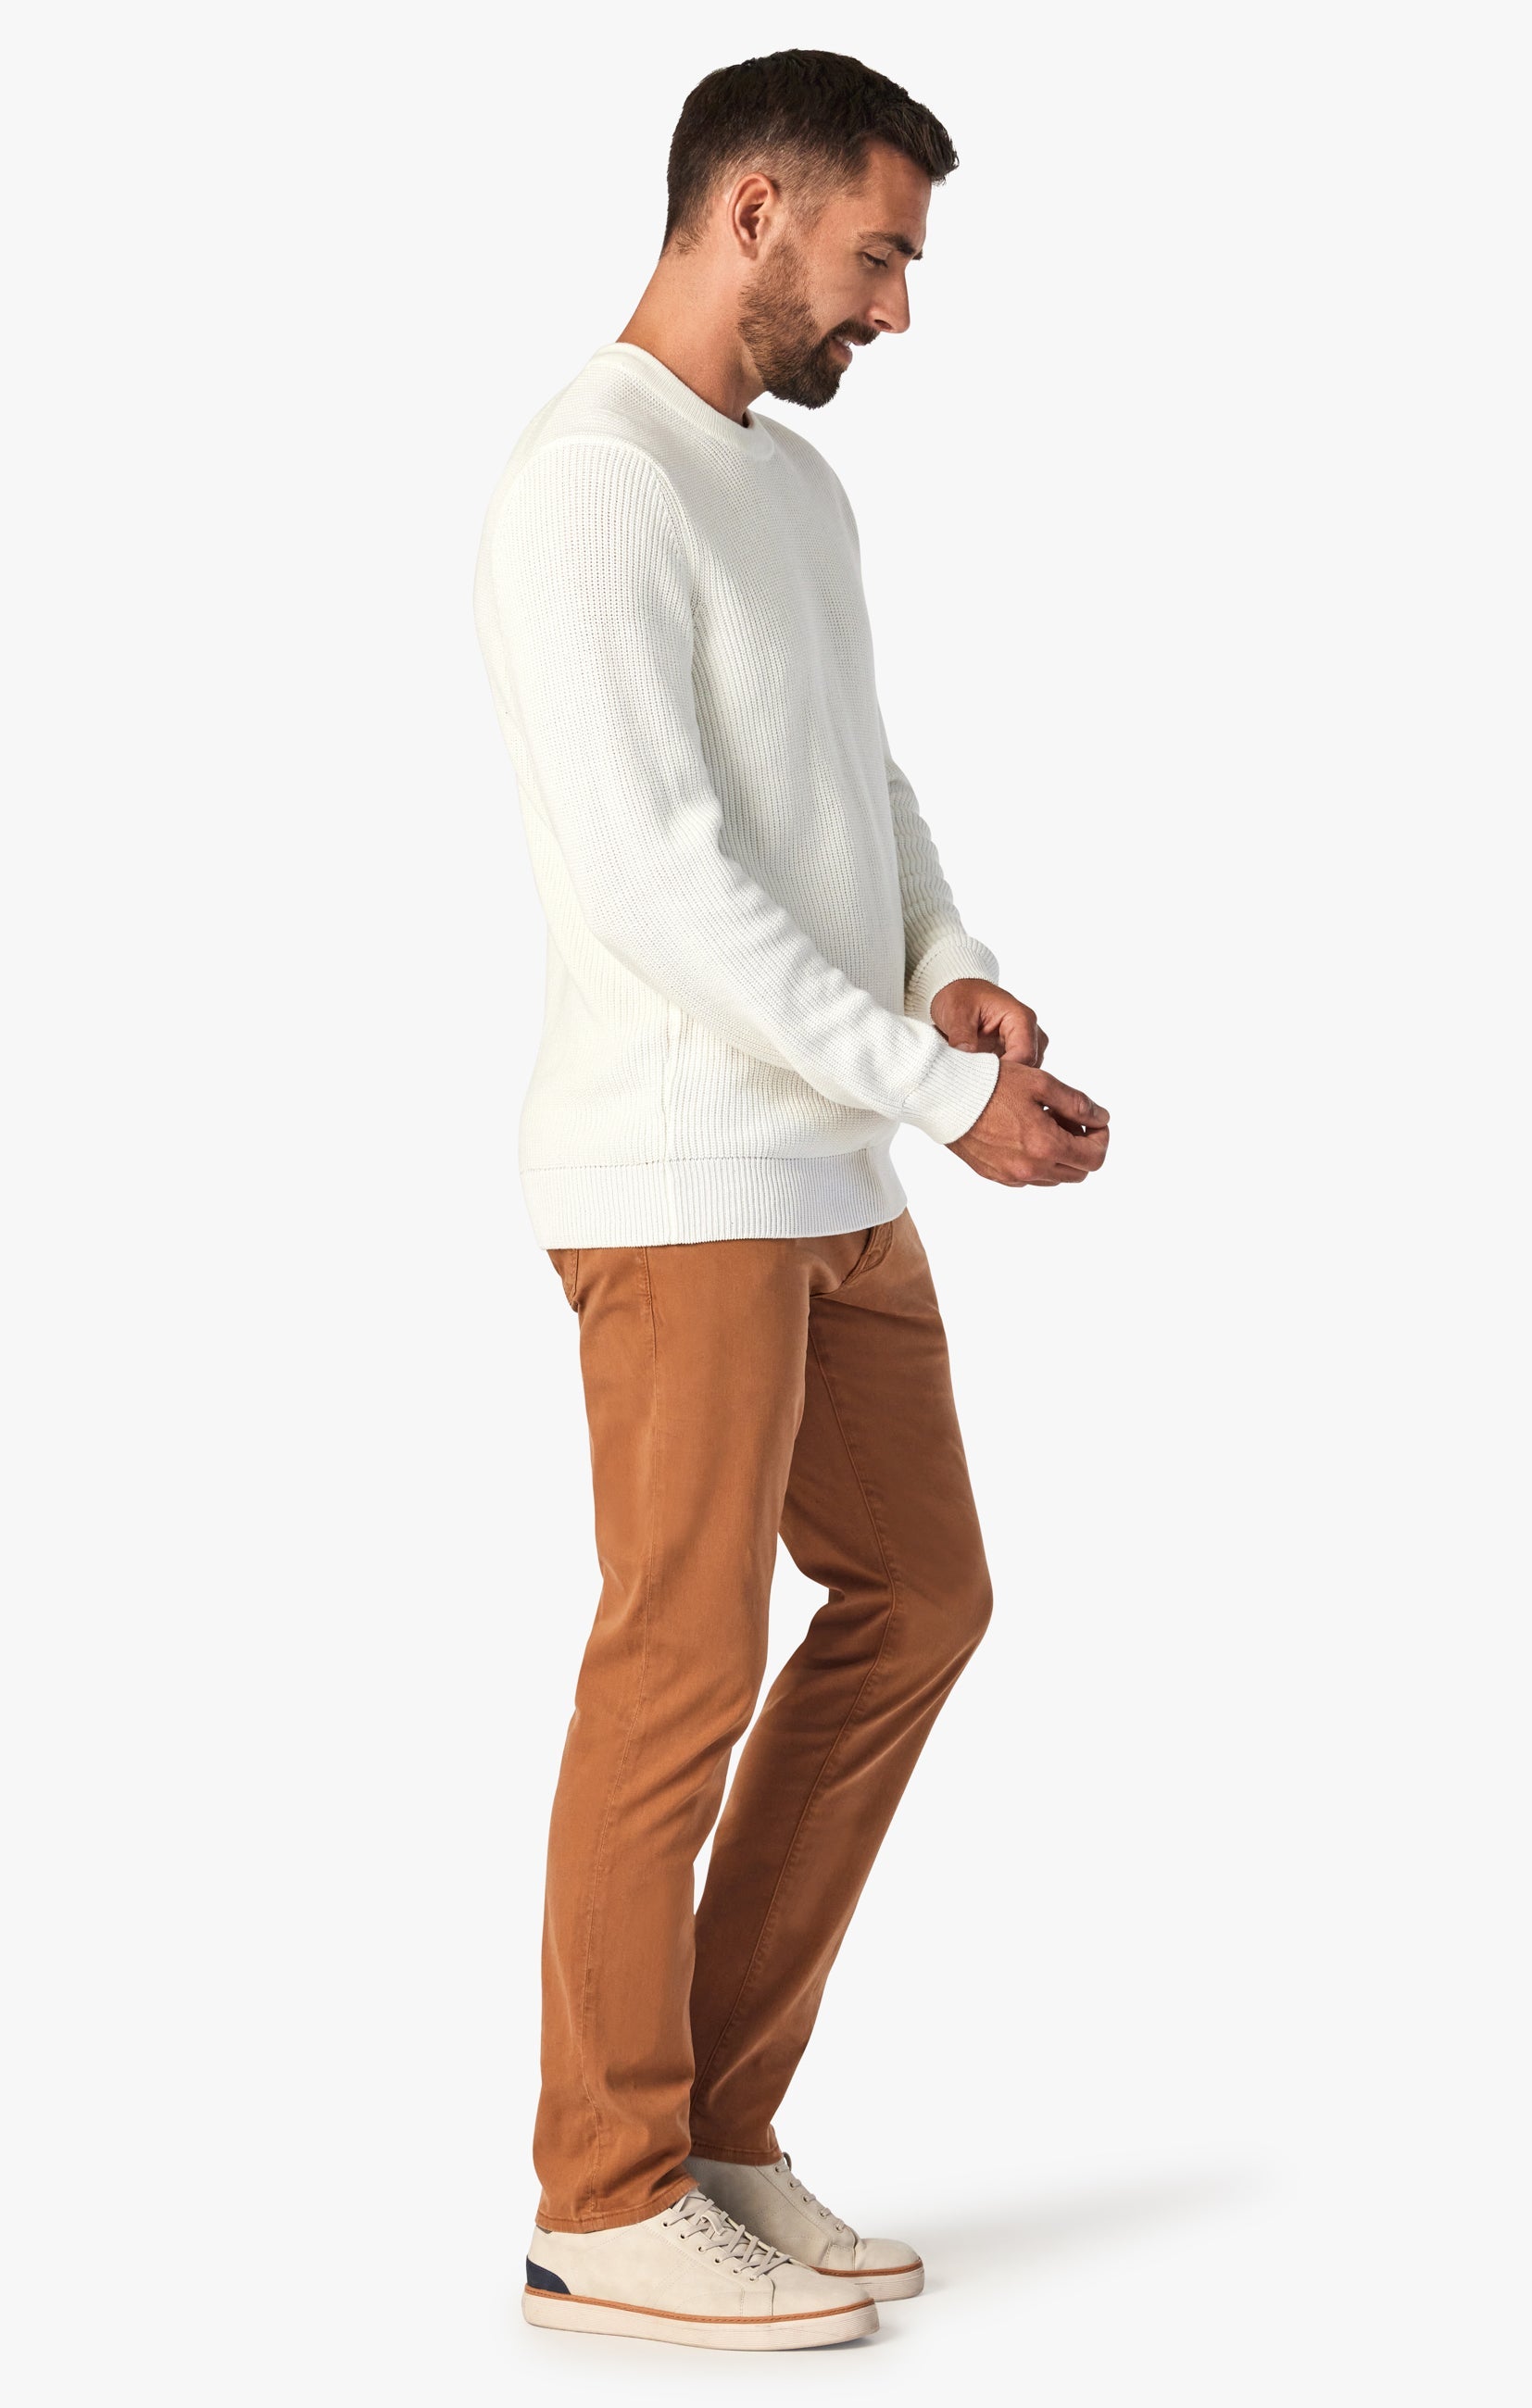 Courage Straight Leg Pants In Argan Oil Twill Image 2